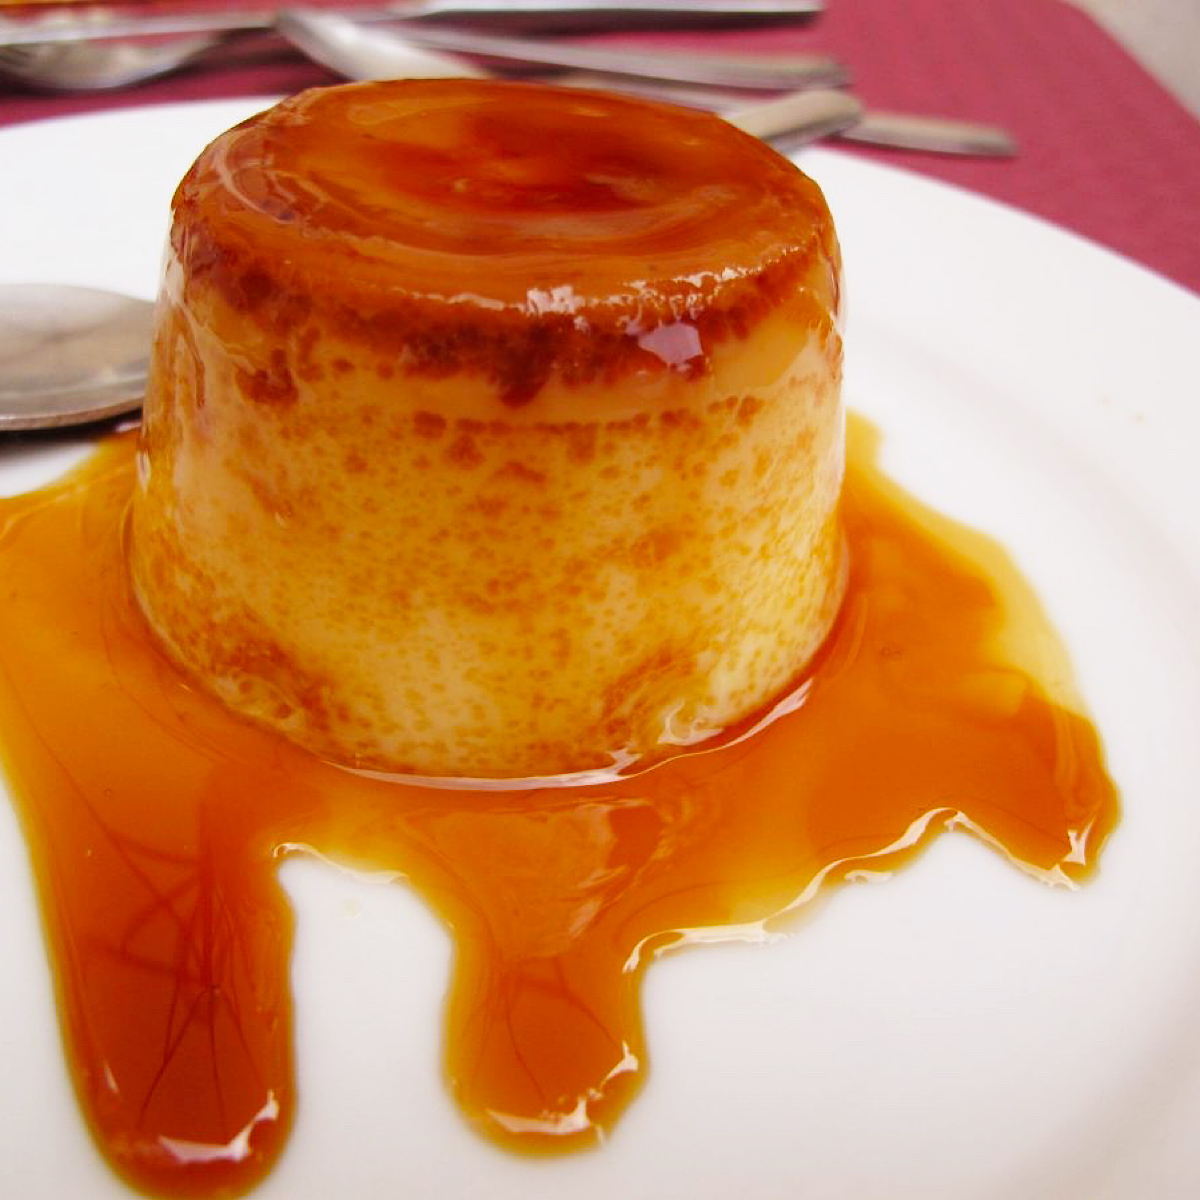 Caramel flan on a white plate from a Spanish restaurant.